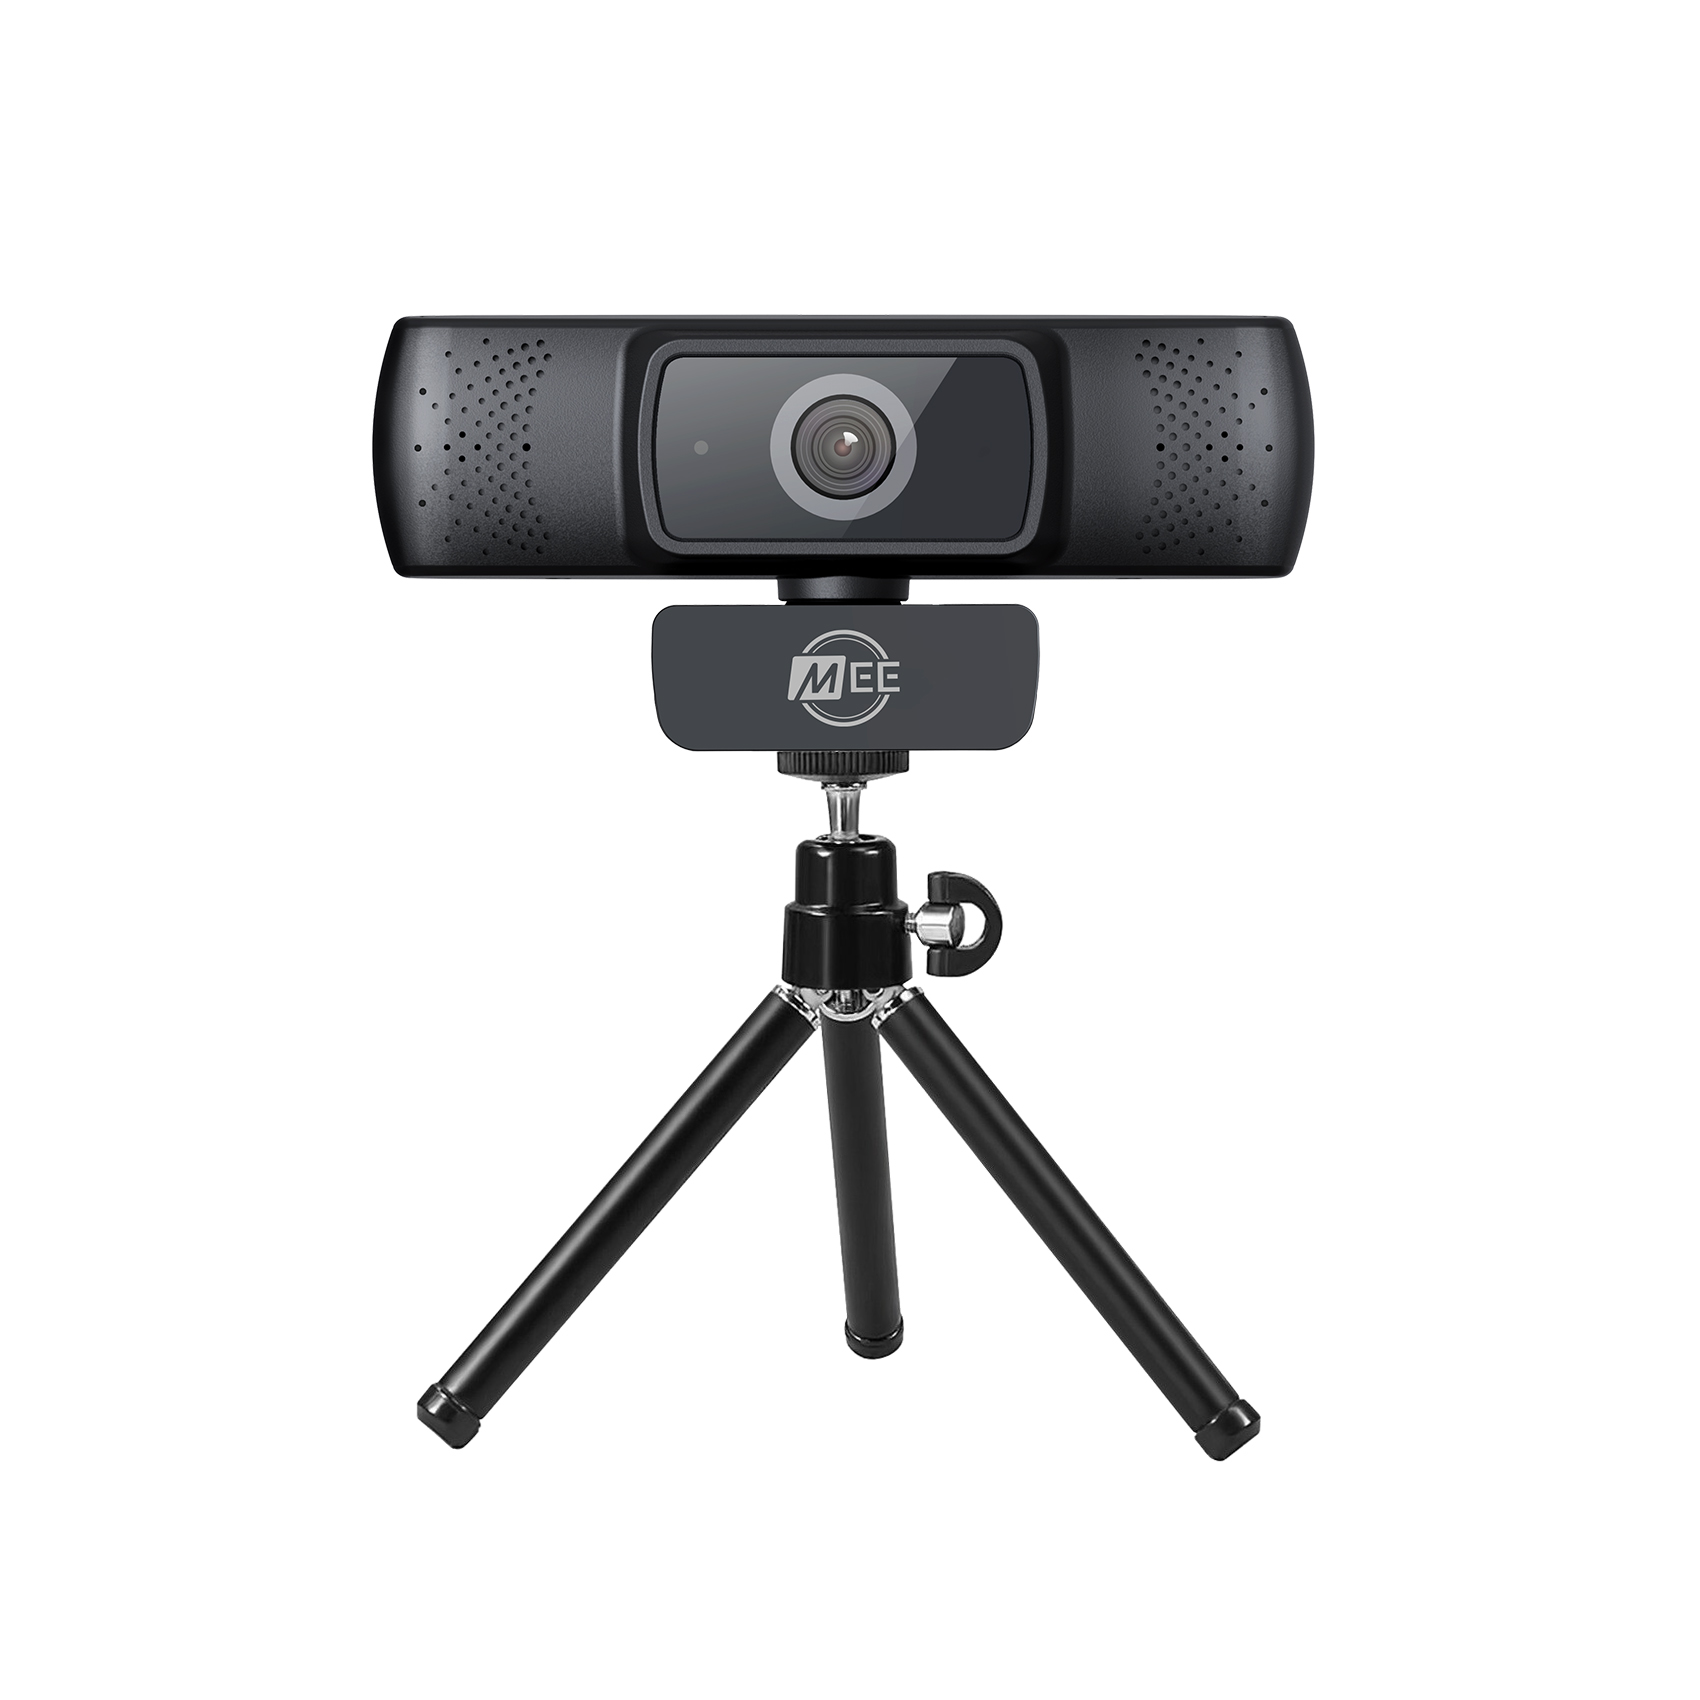 MEE audio 201W 1080p Webcam with Autofocus & Tripod Included for $13.99 + Free Shipping w/ Prime or orders $25+